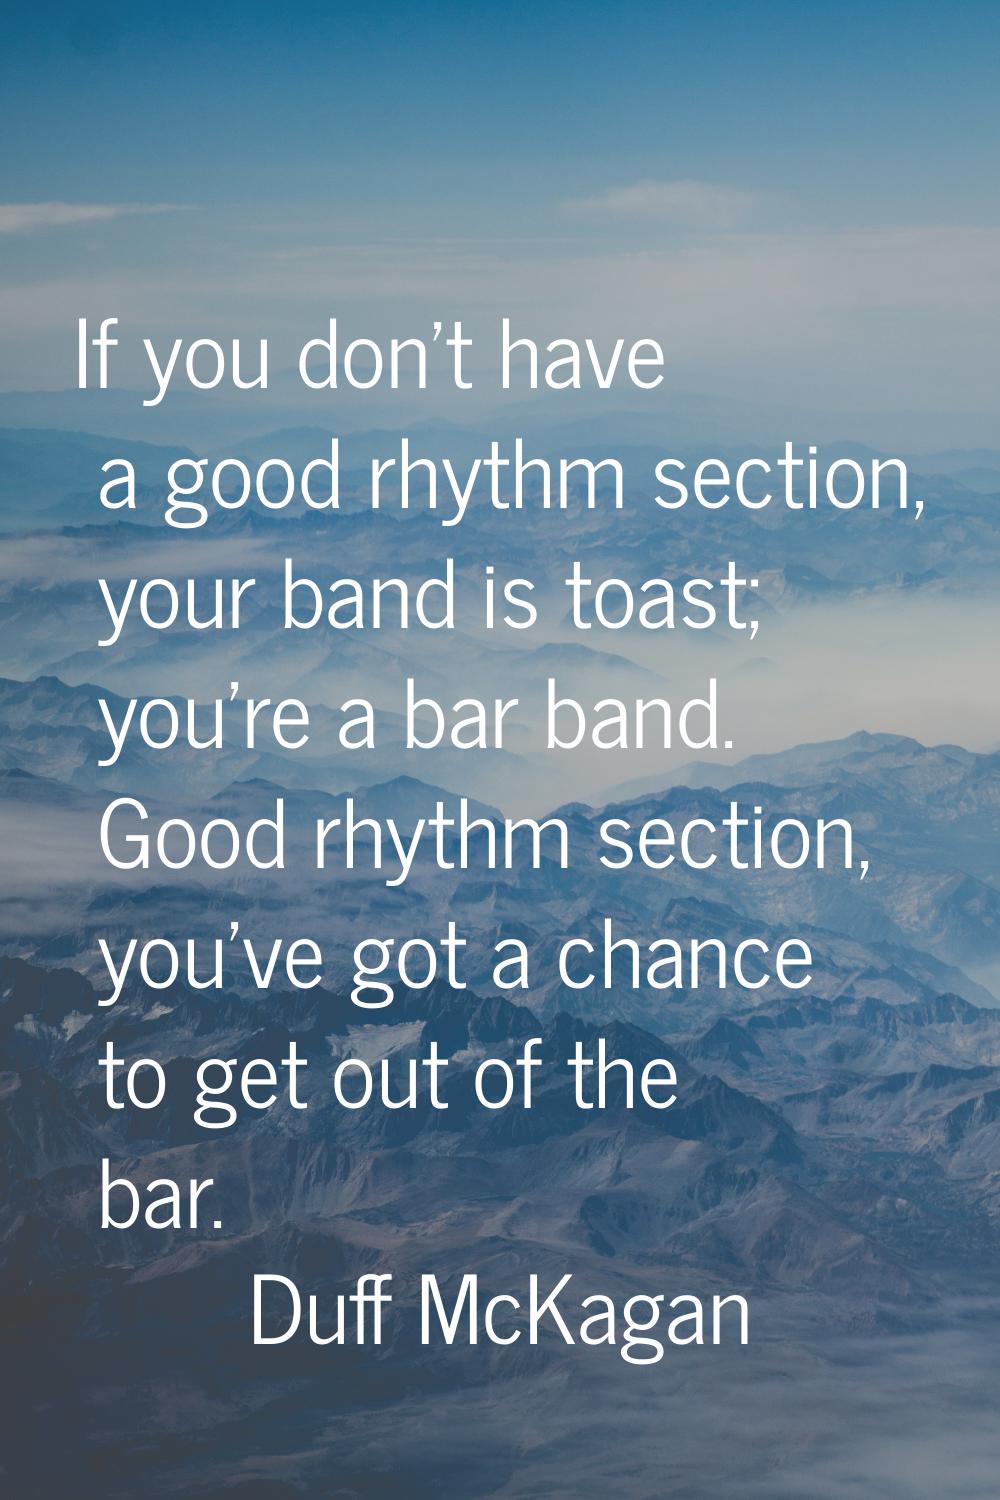 If you don't have a good rhythm section, your band is toast; you're a bar band. Good rhythm section